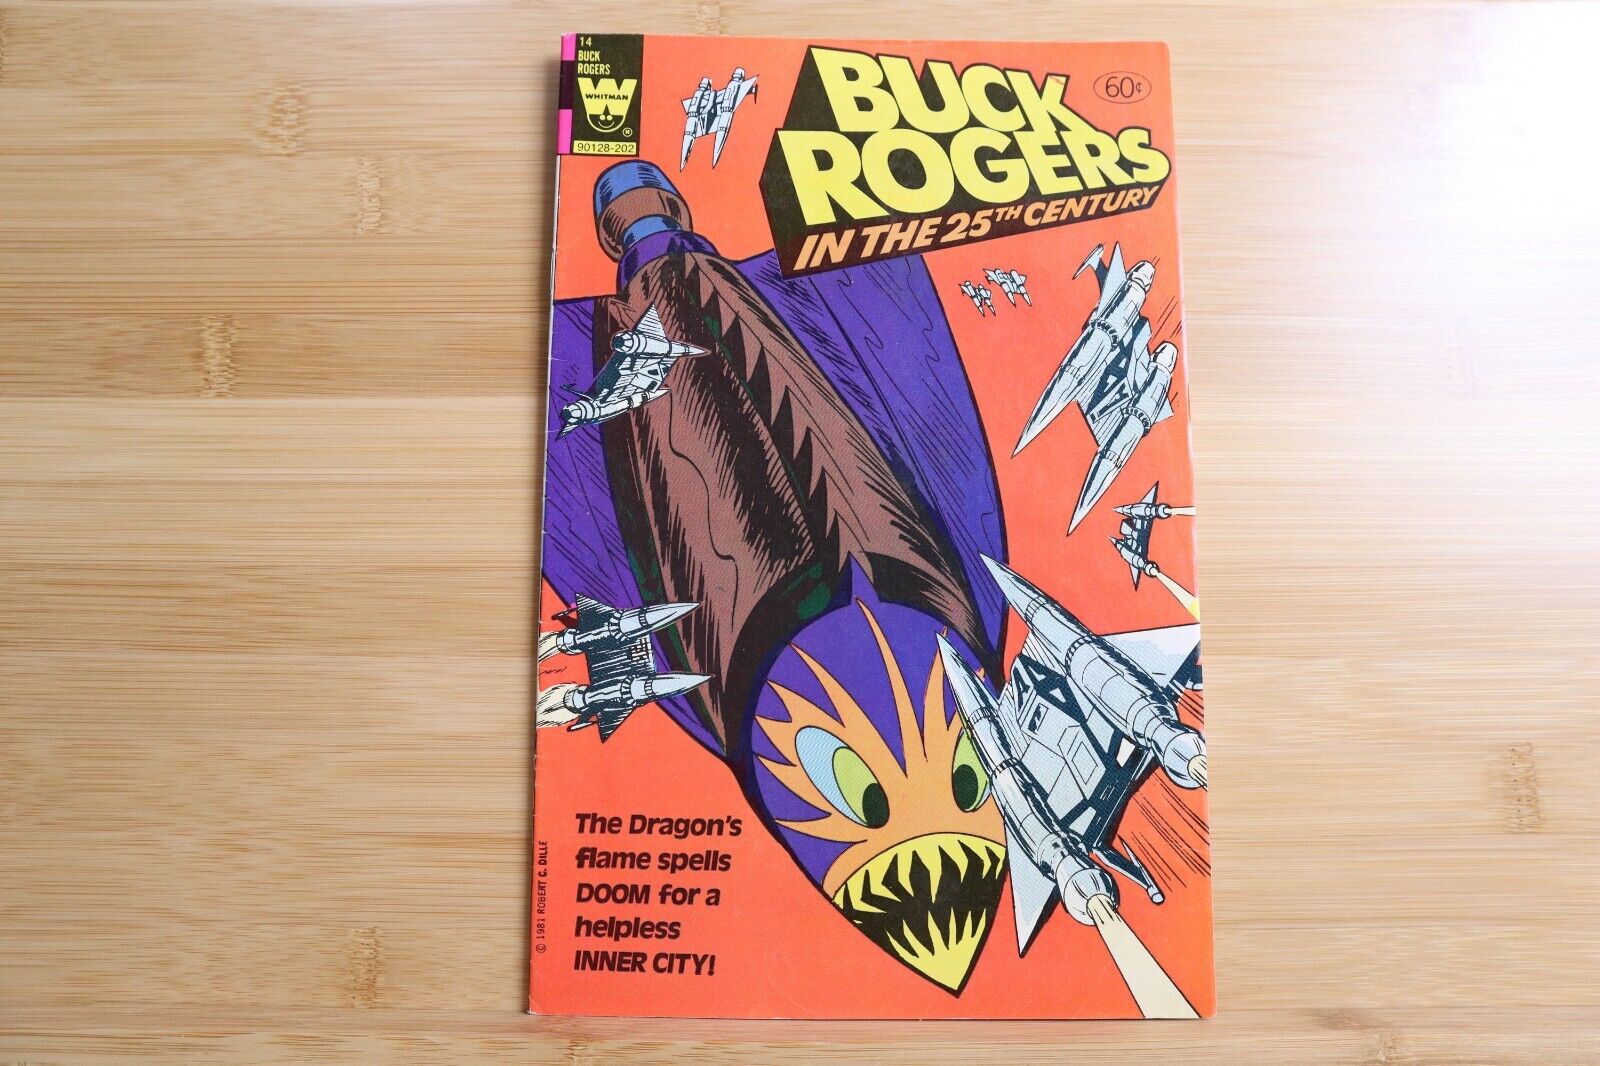 Buck Rogers in the 25th Century #14 Whitman Comics Flames of the Dragon - 1981